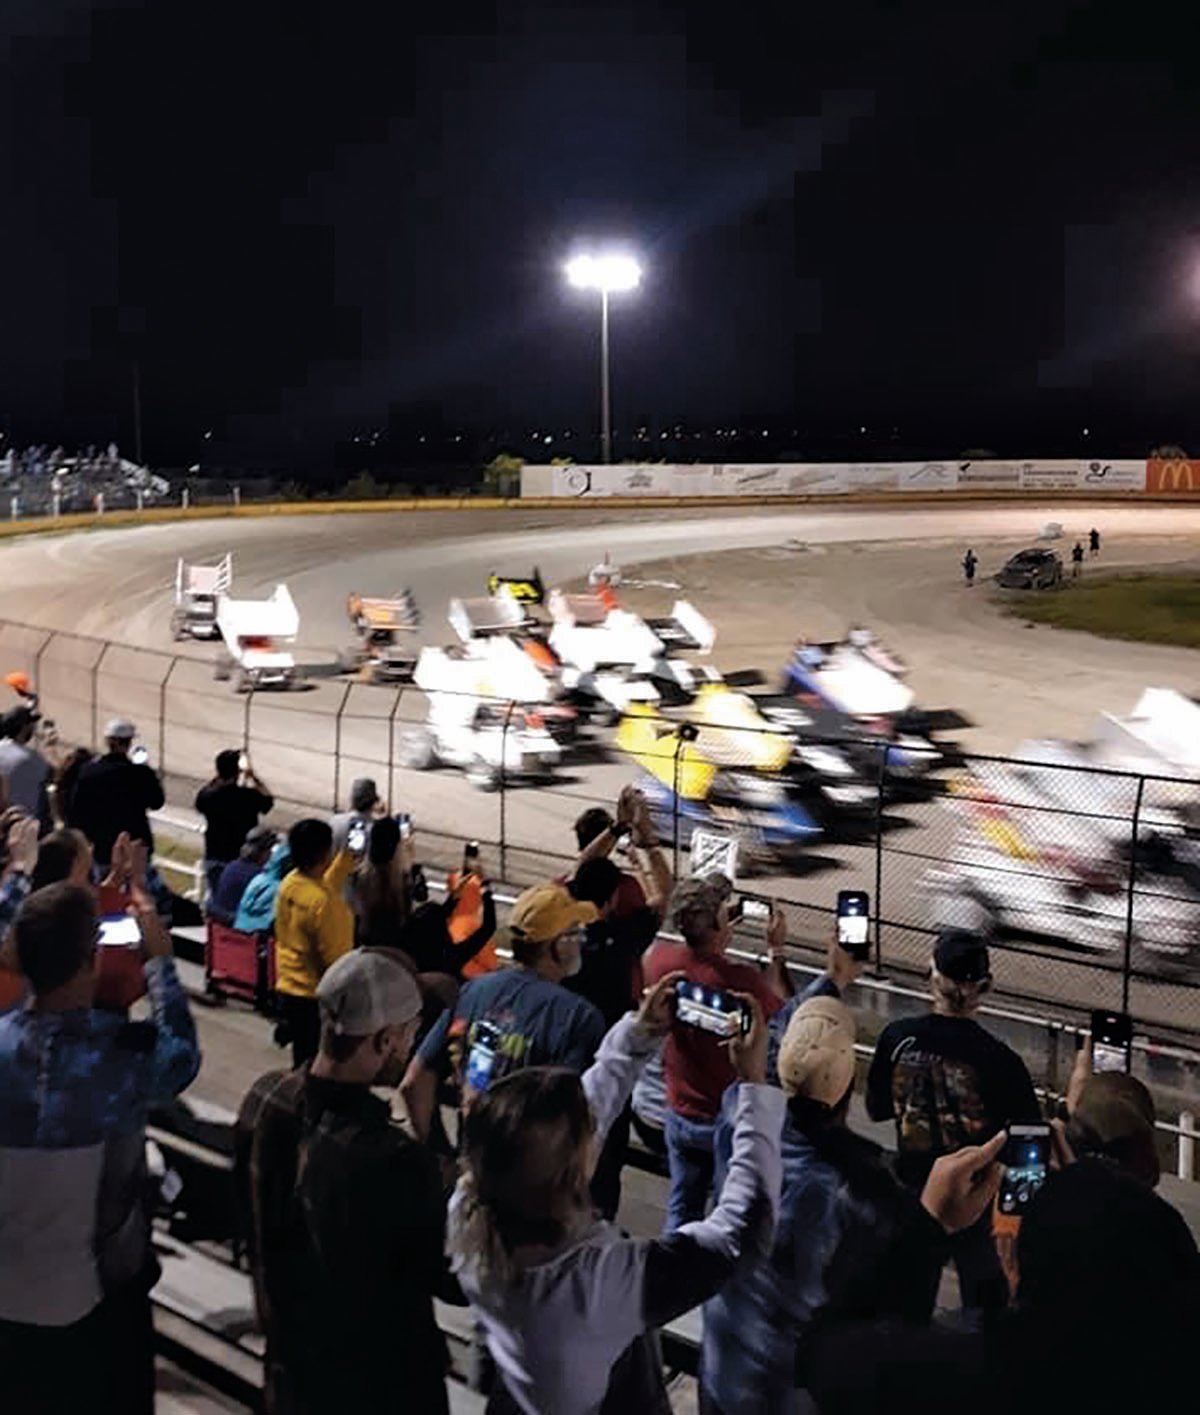 Race fans cheer for their favorite drivers from the stands at the Hendry County Motorsports Park.